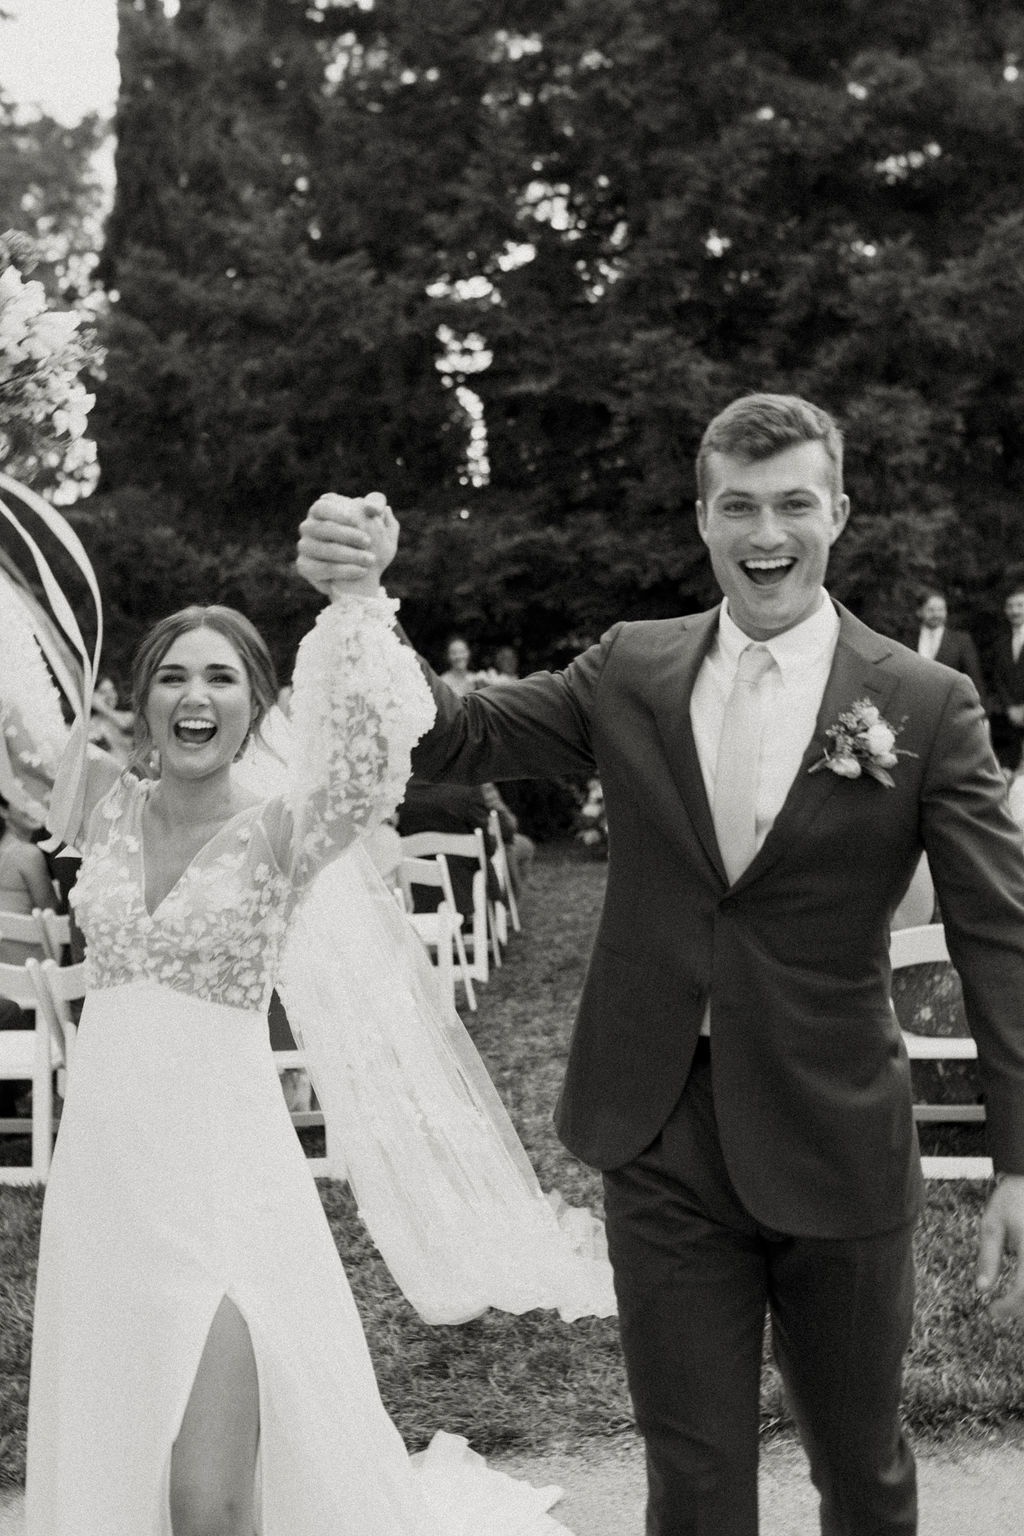 Boho bride and groom cheering after ceremony